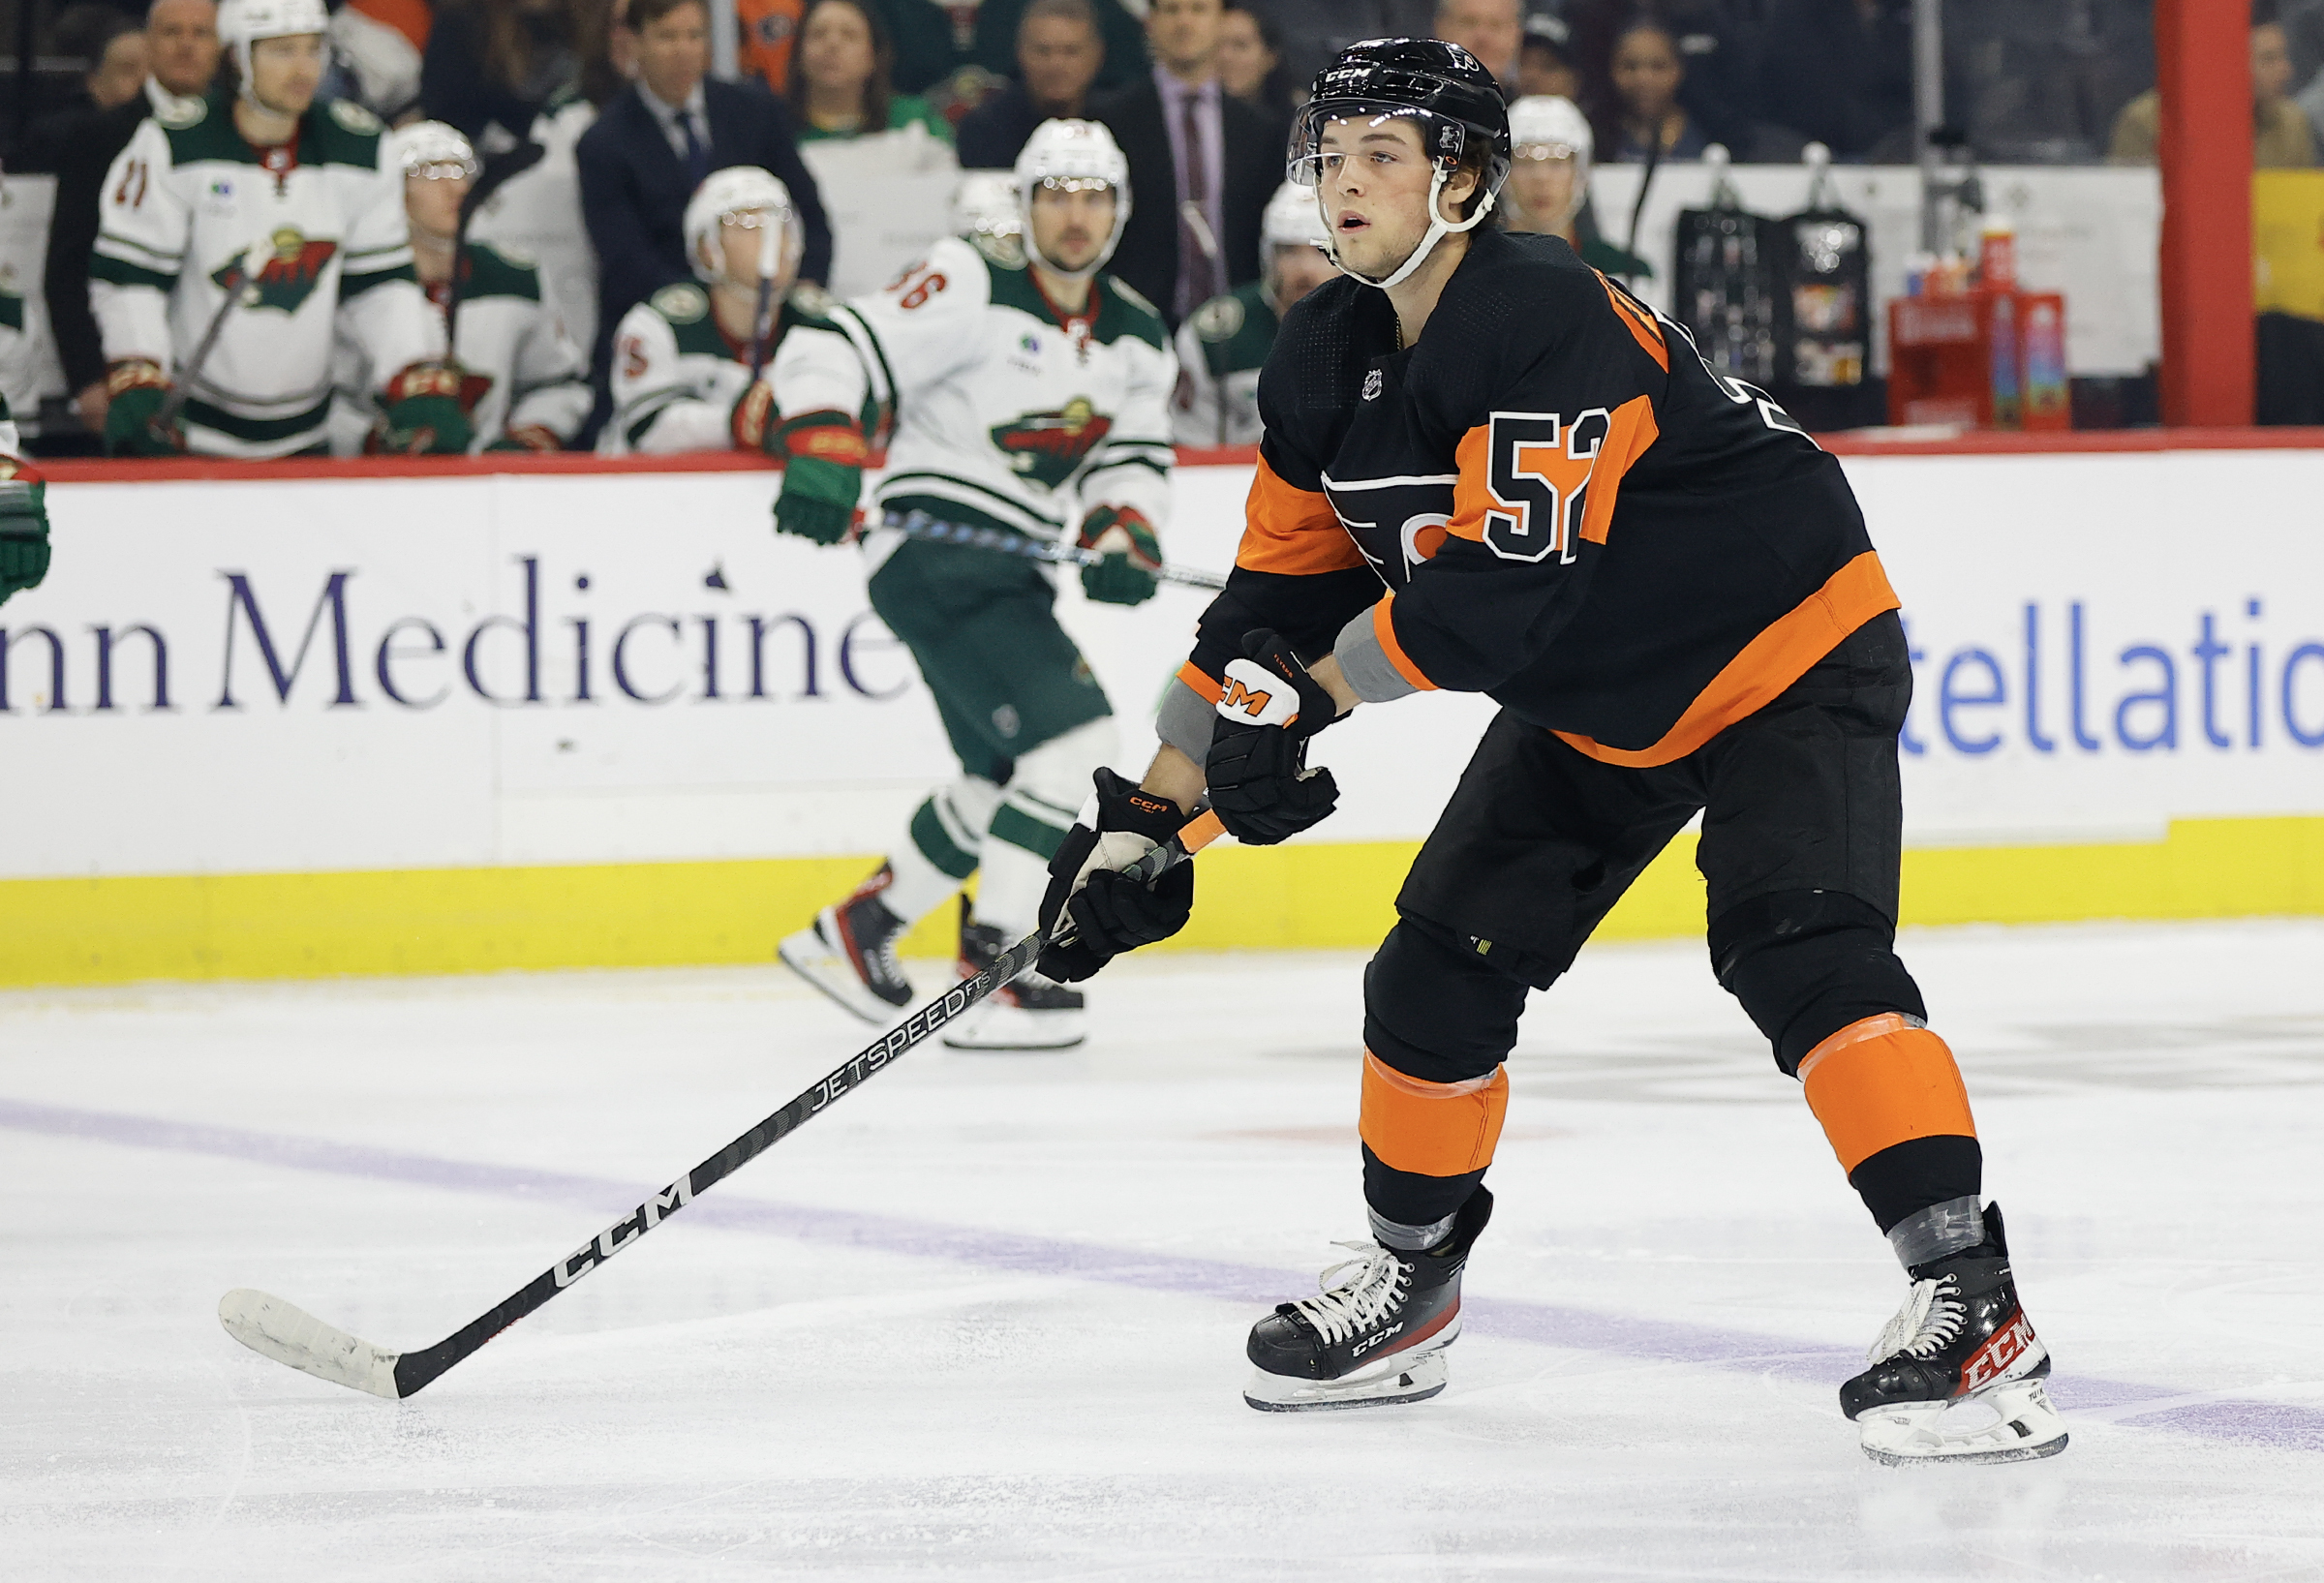 Foerster, Brink, Andrae headline young players to watch on Flyers